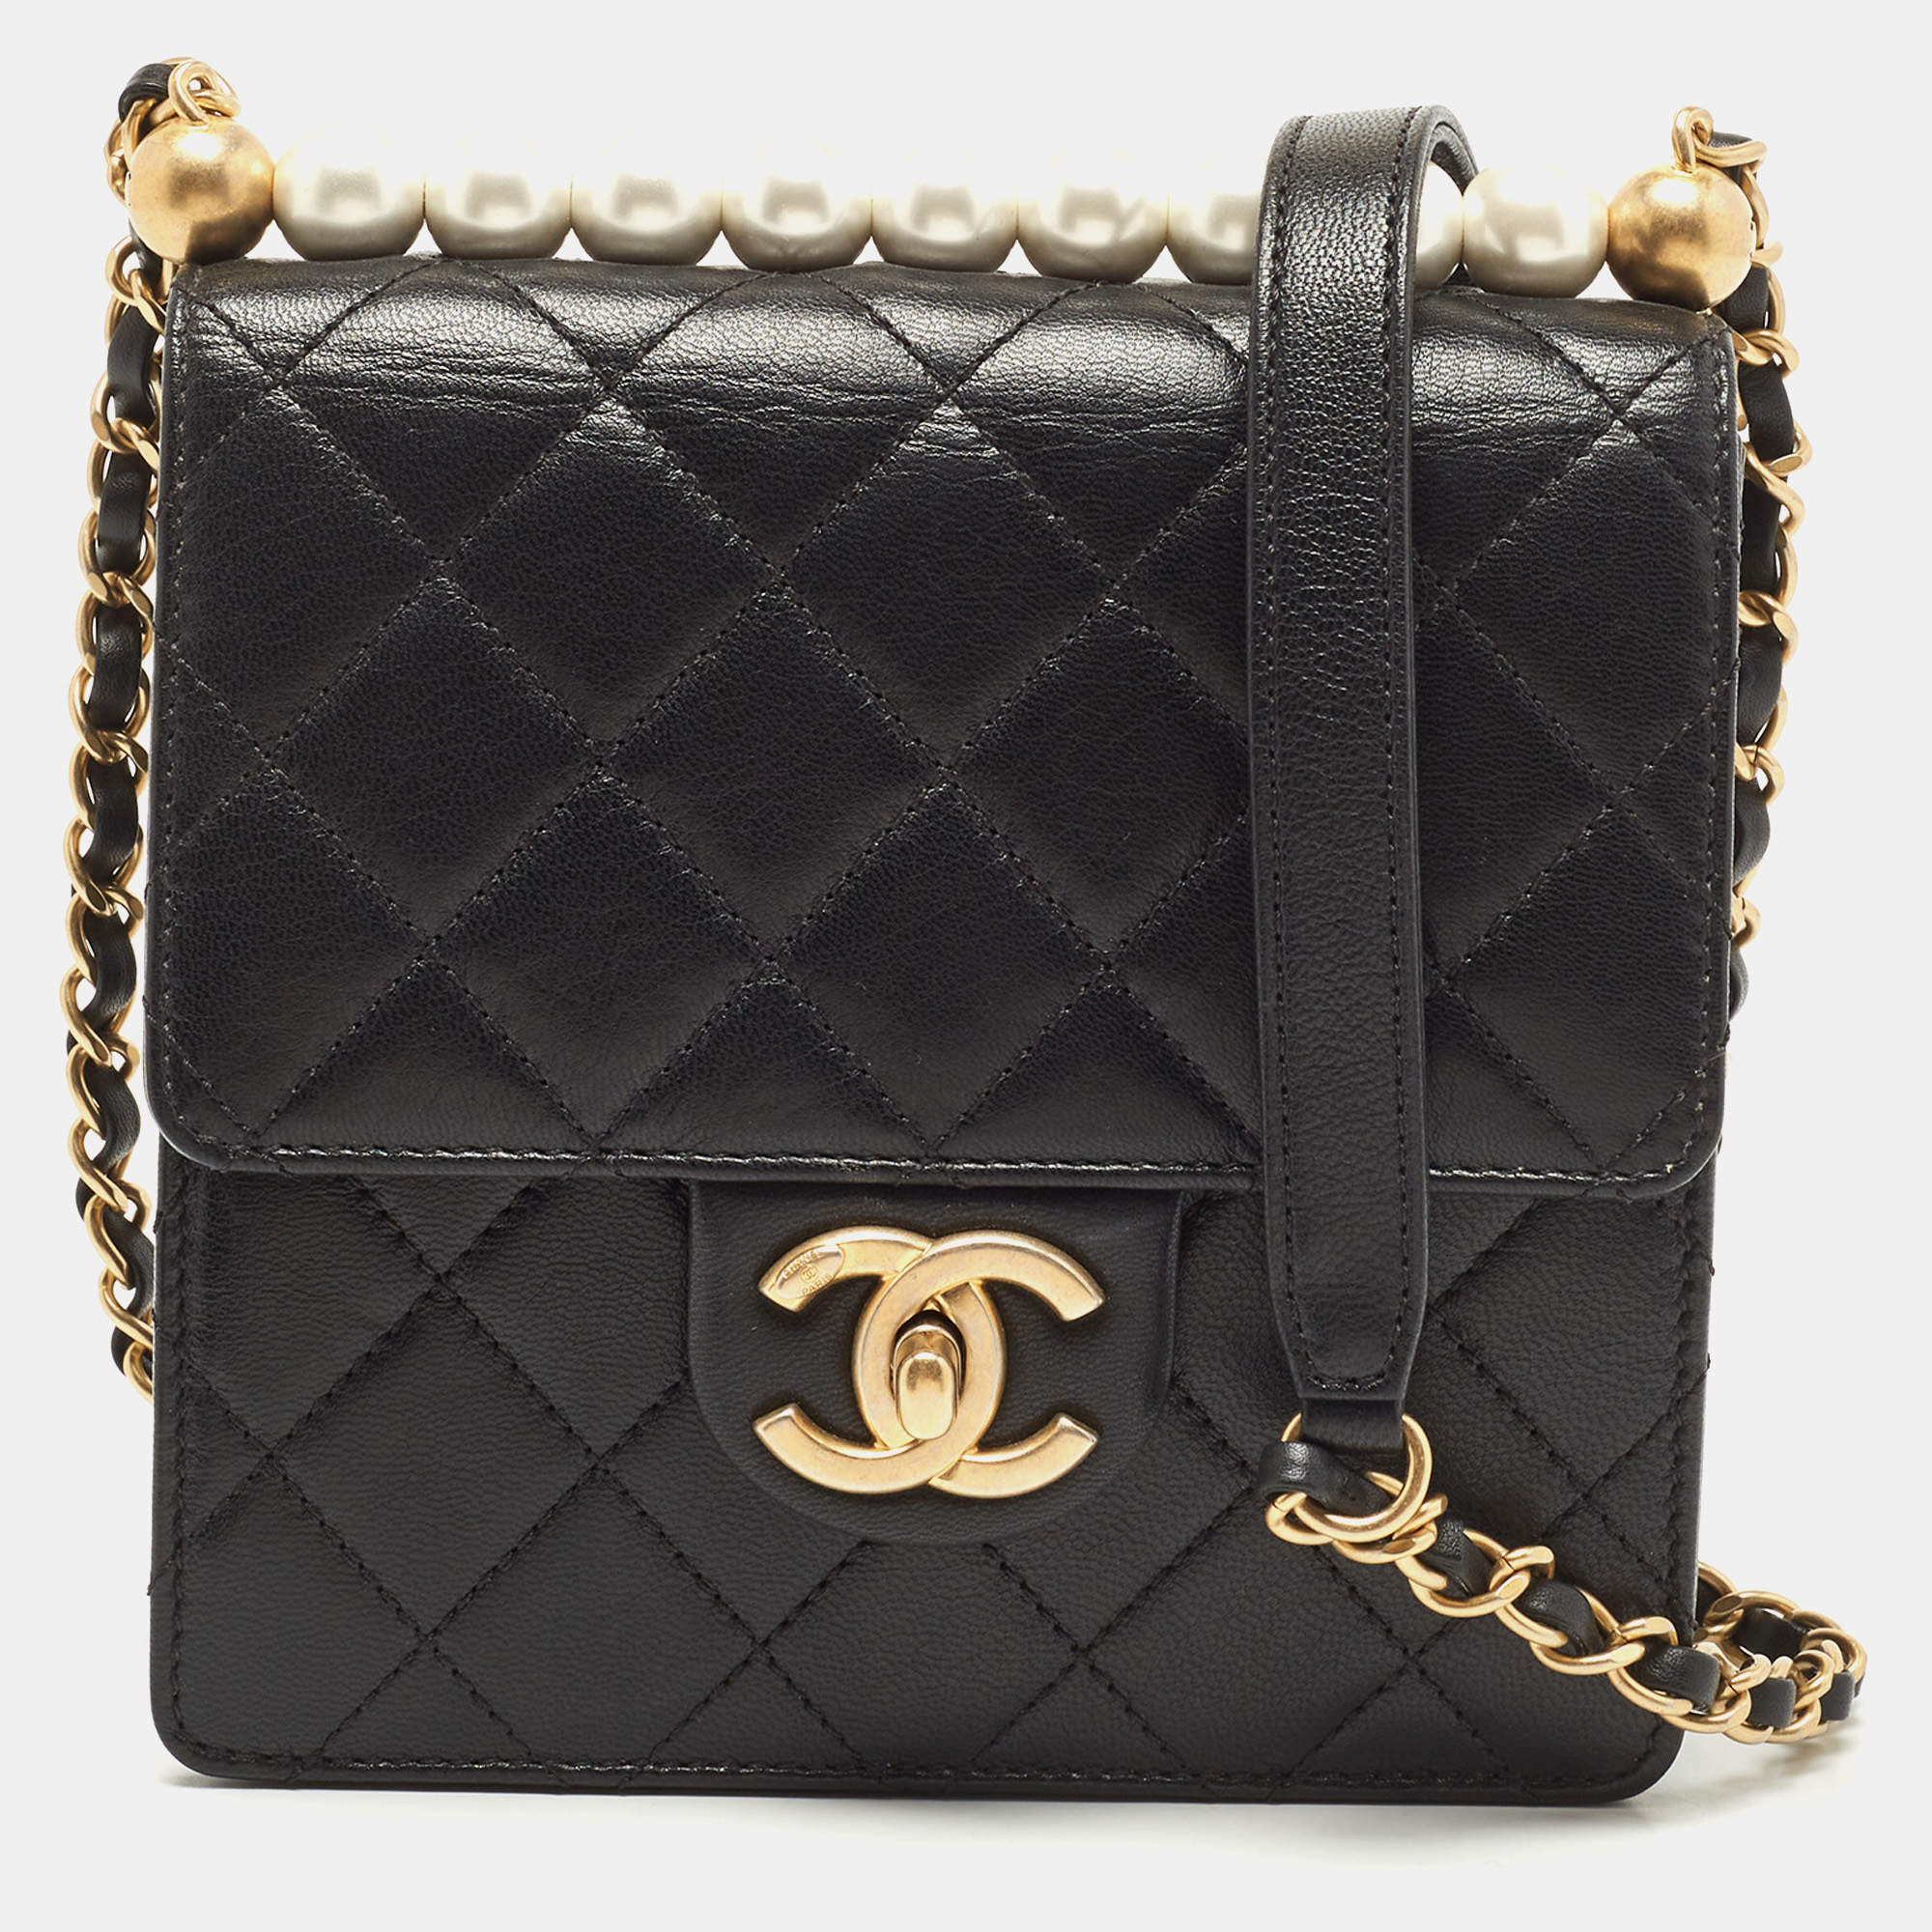 chanel black and white quilted purse handbag